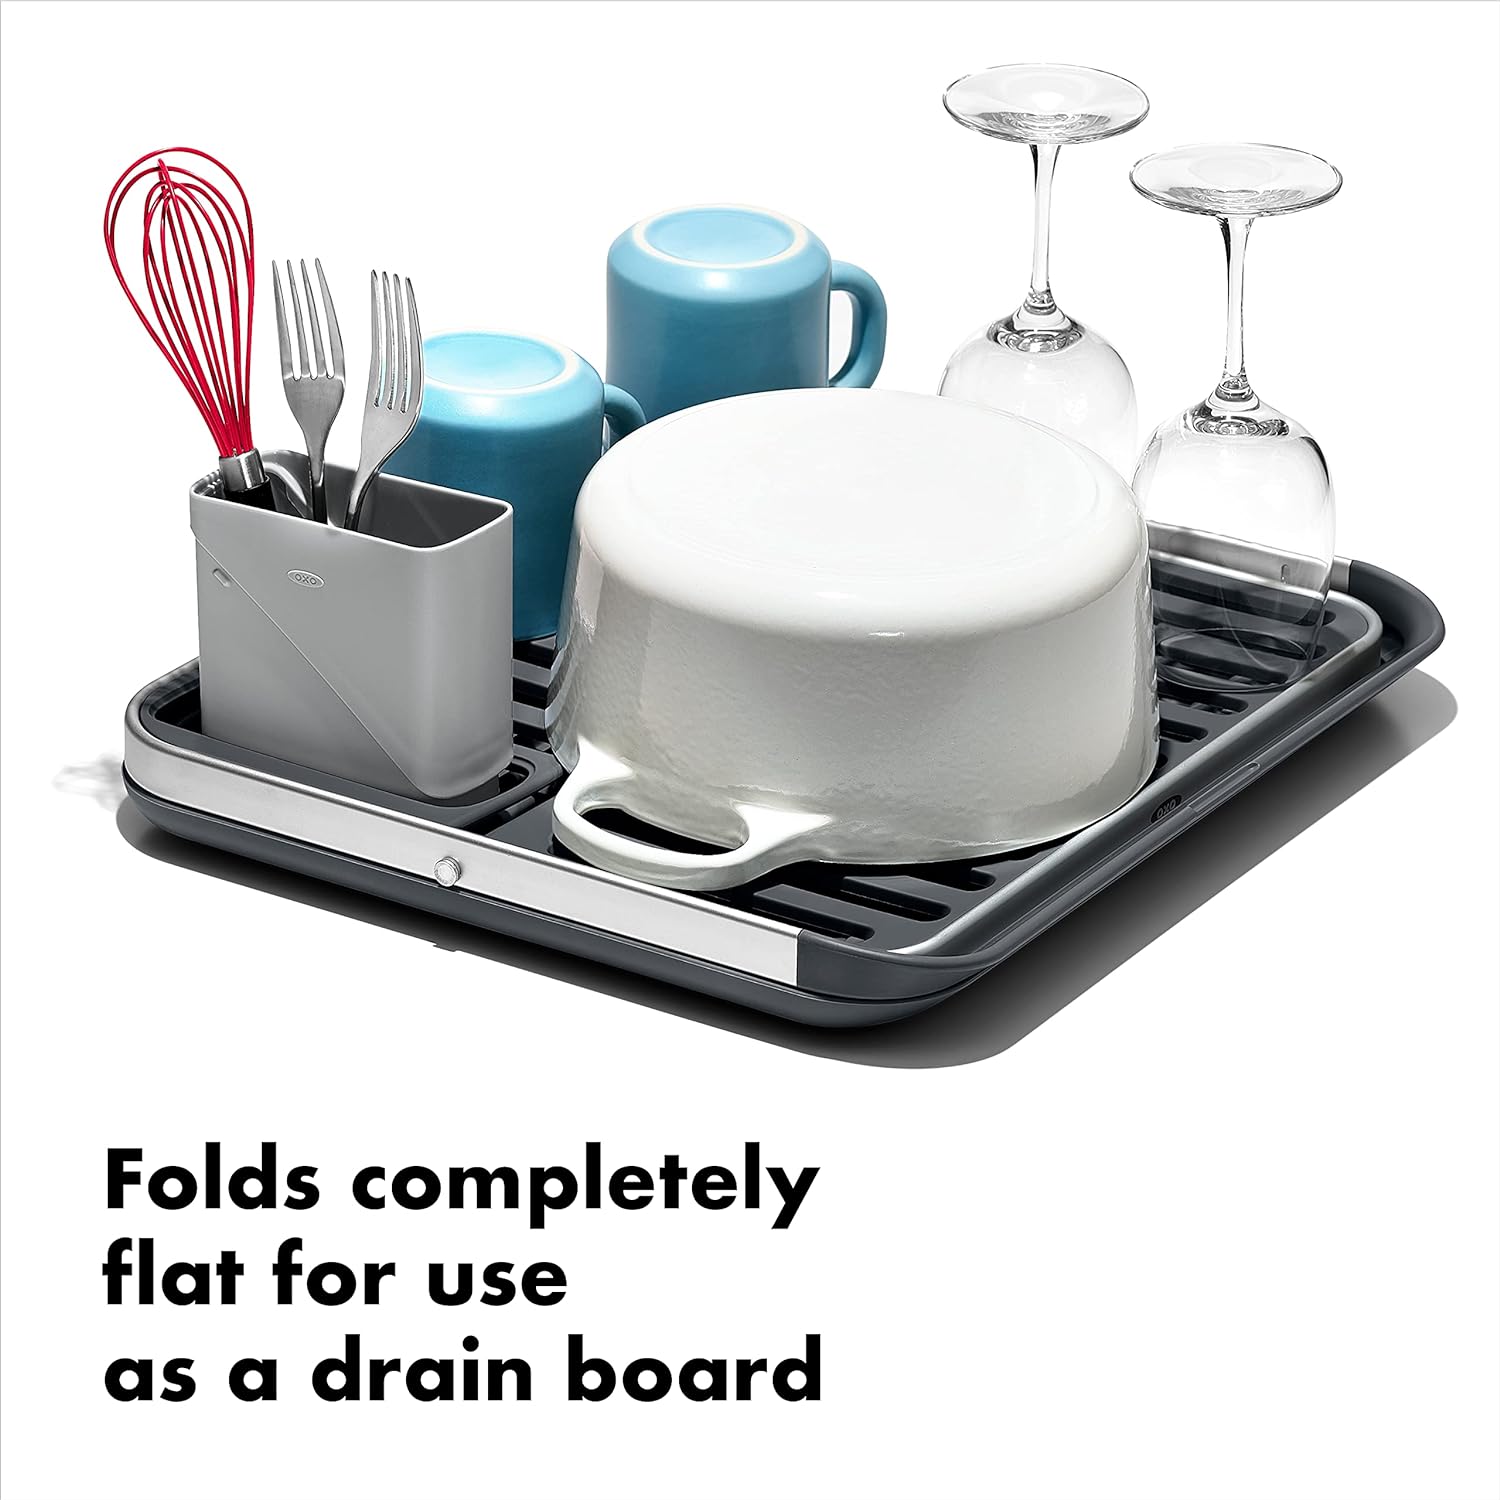 OXO Good Grips Aluminum Fold Flat Dish Drying Rack, 2-Tier, with Drainboard,  for Kitchen Counter, Collapsible